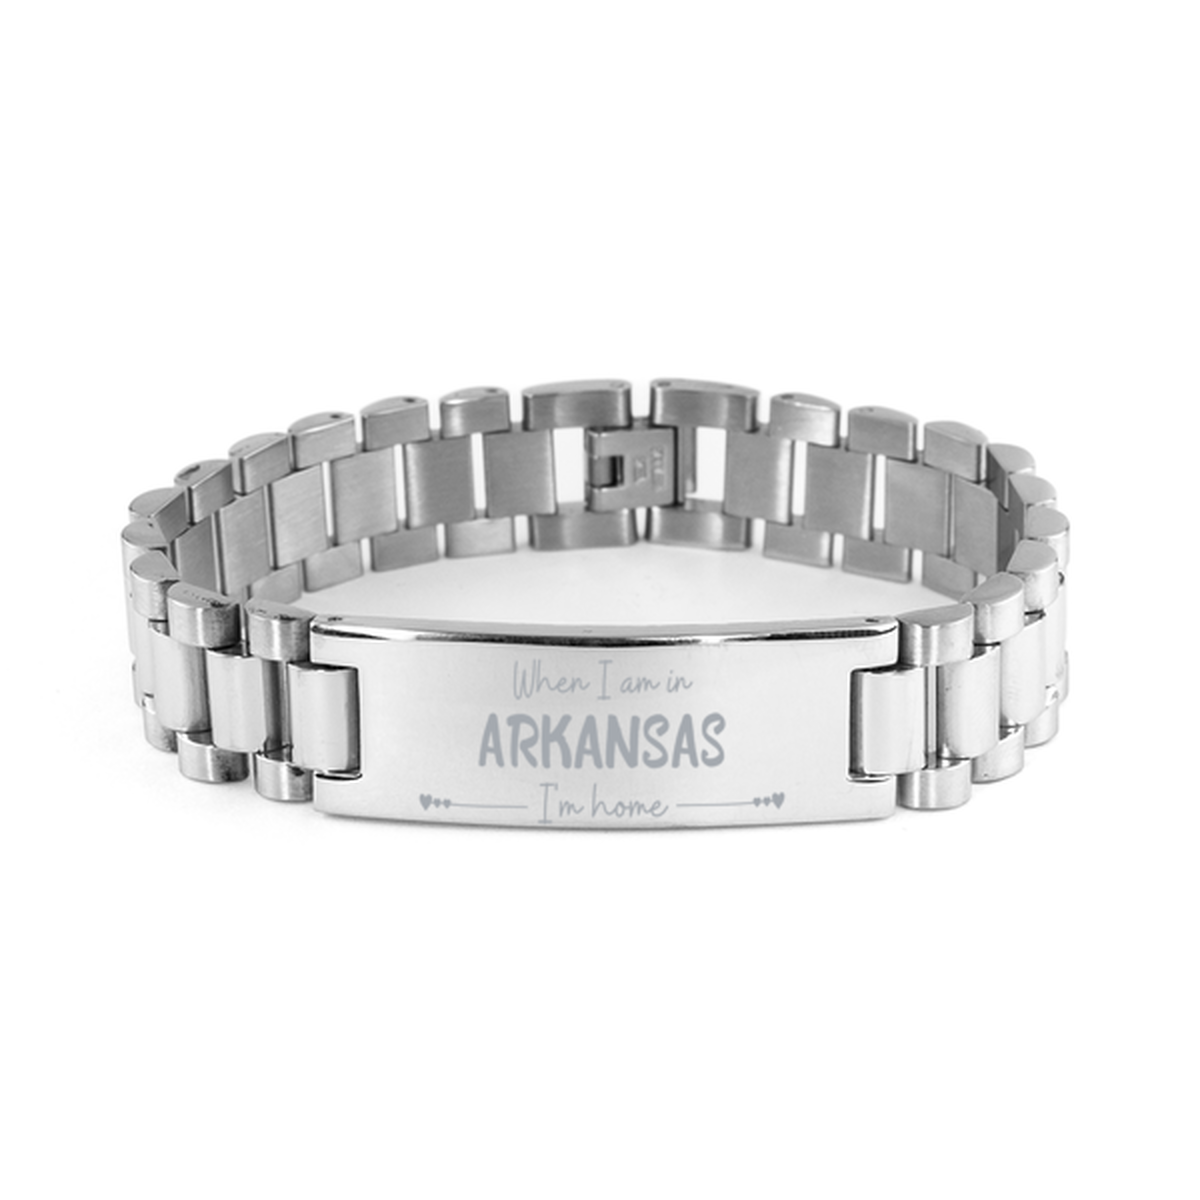 When I am in Arkansas I'm home Ladder Stainless Steel Bracelet, Cheap Gifts For Arkansas, State Arkansas Birthday Gifts for Friends Coworker